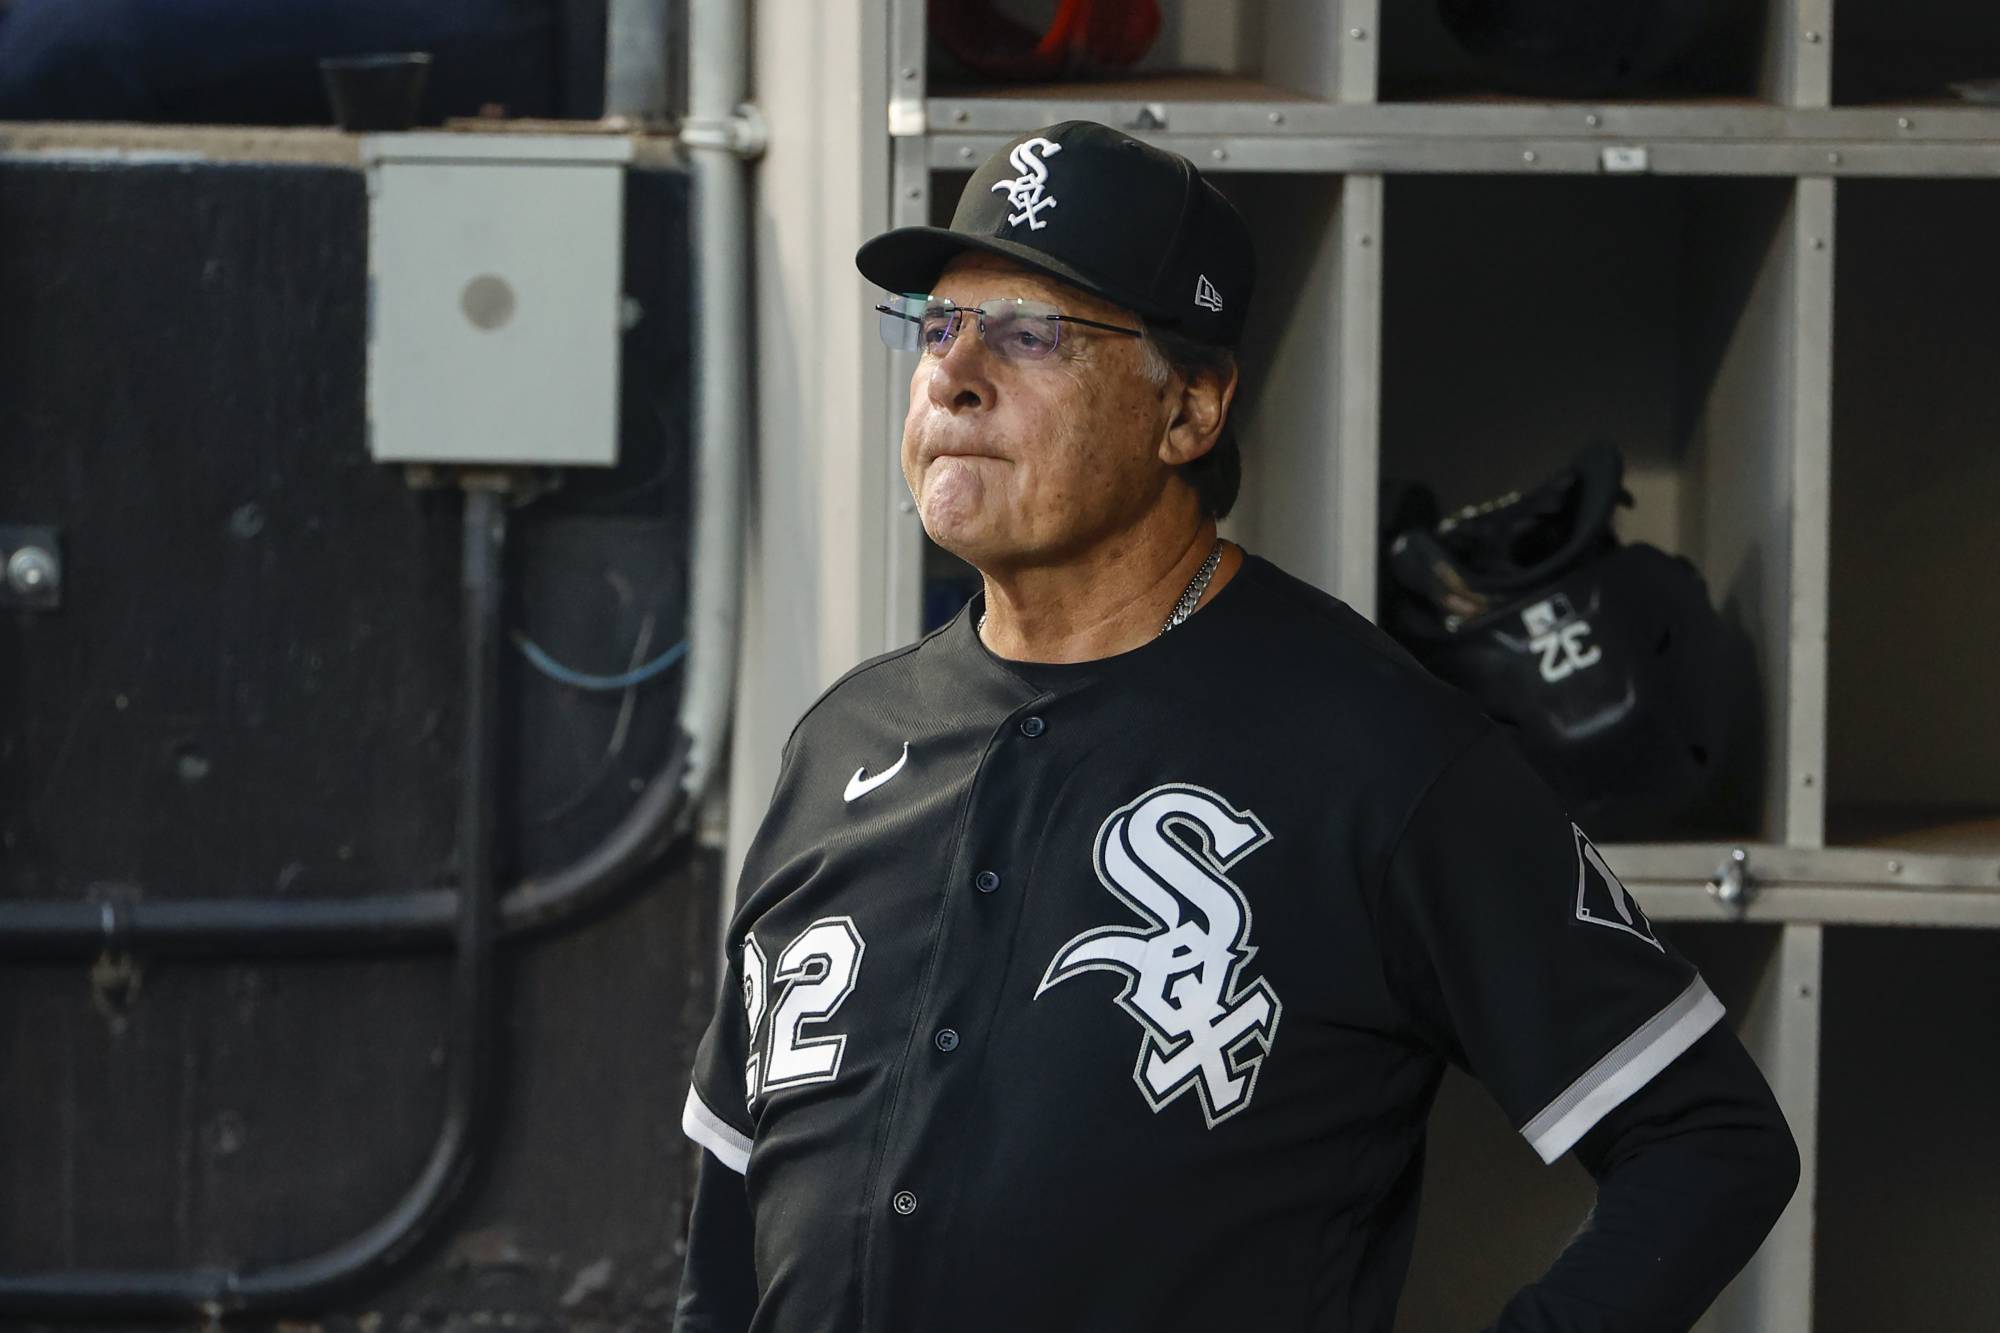 White Sox make Hall of Fame manager La Russa oldest in MLB